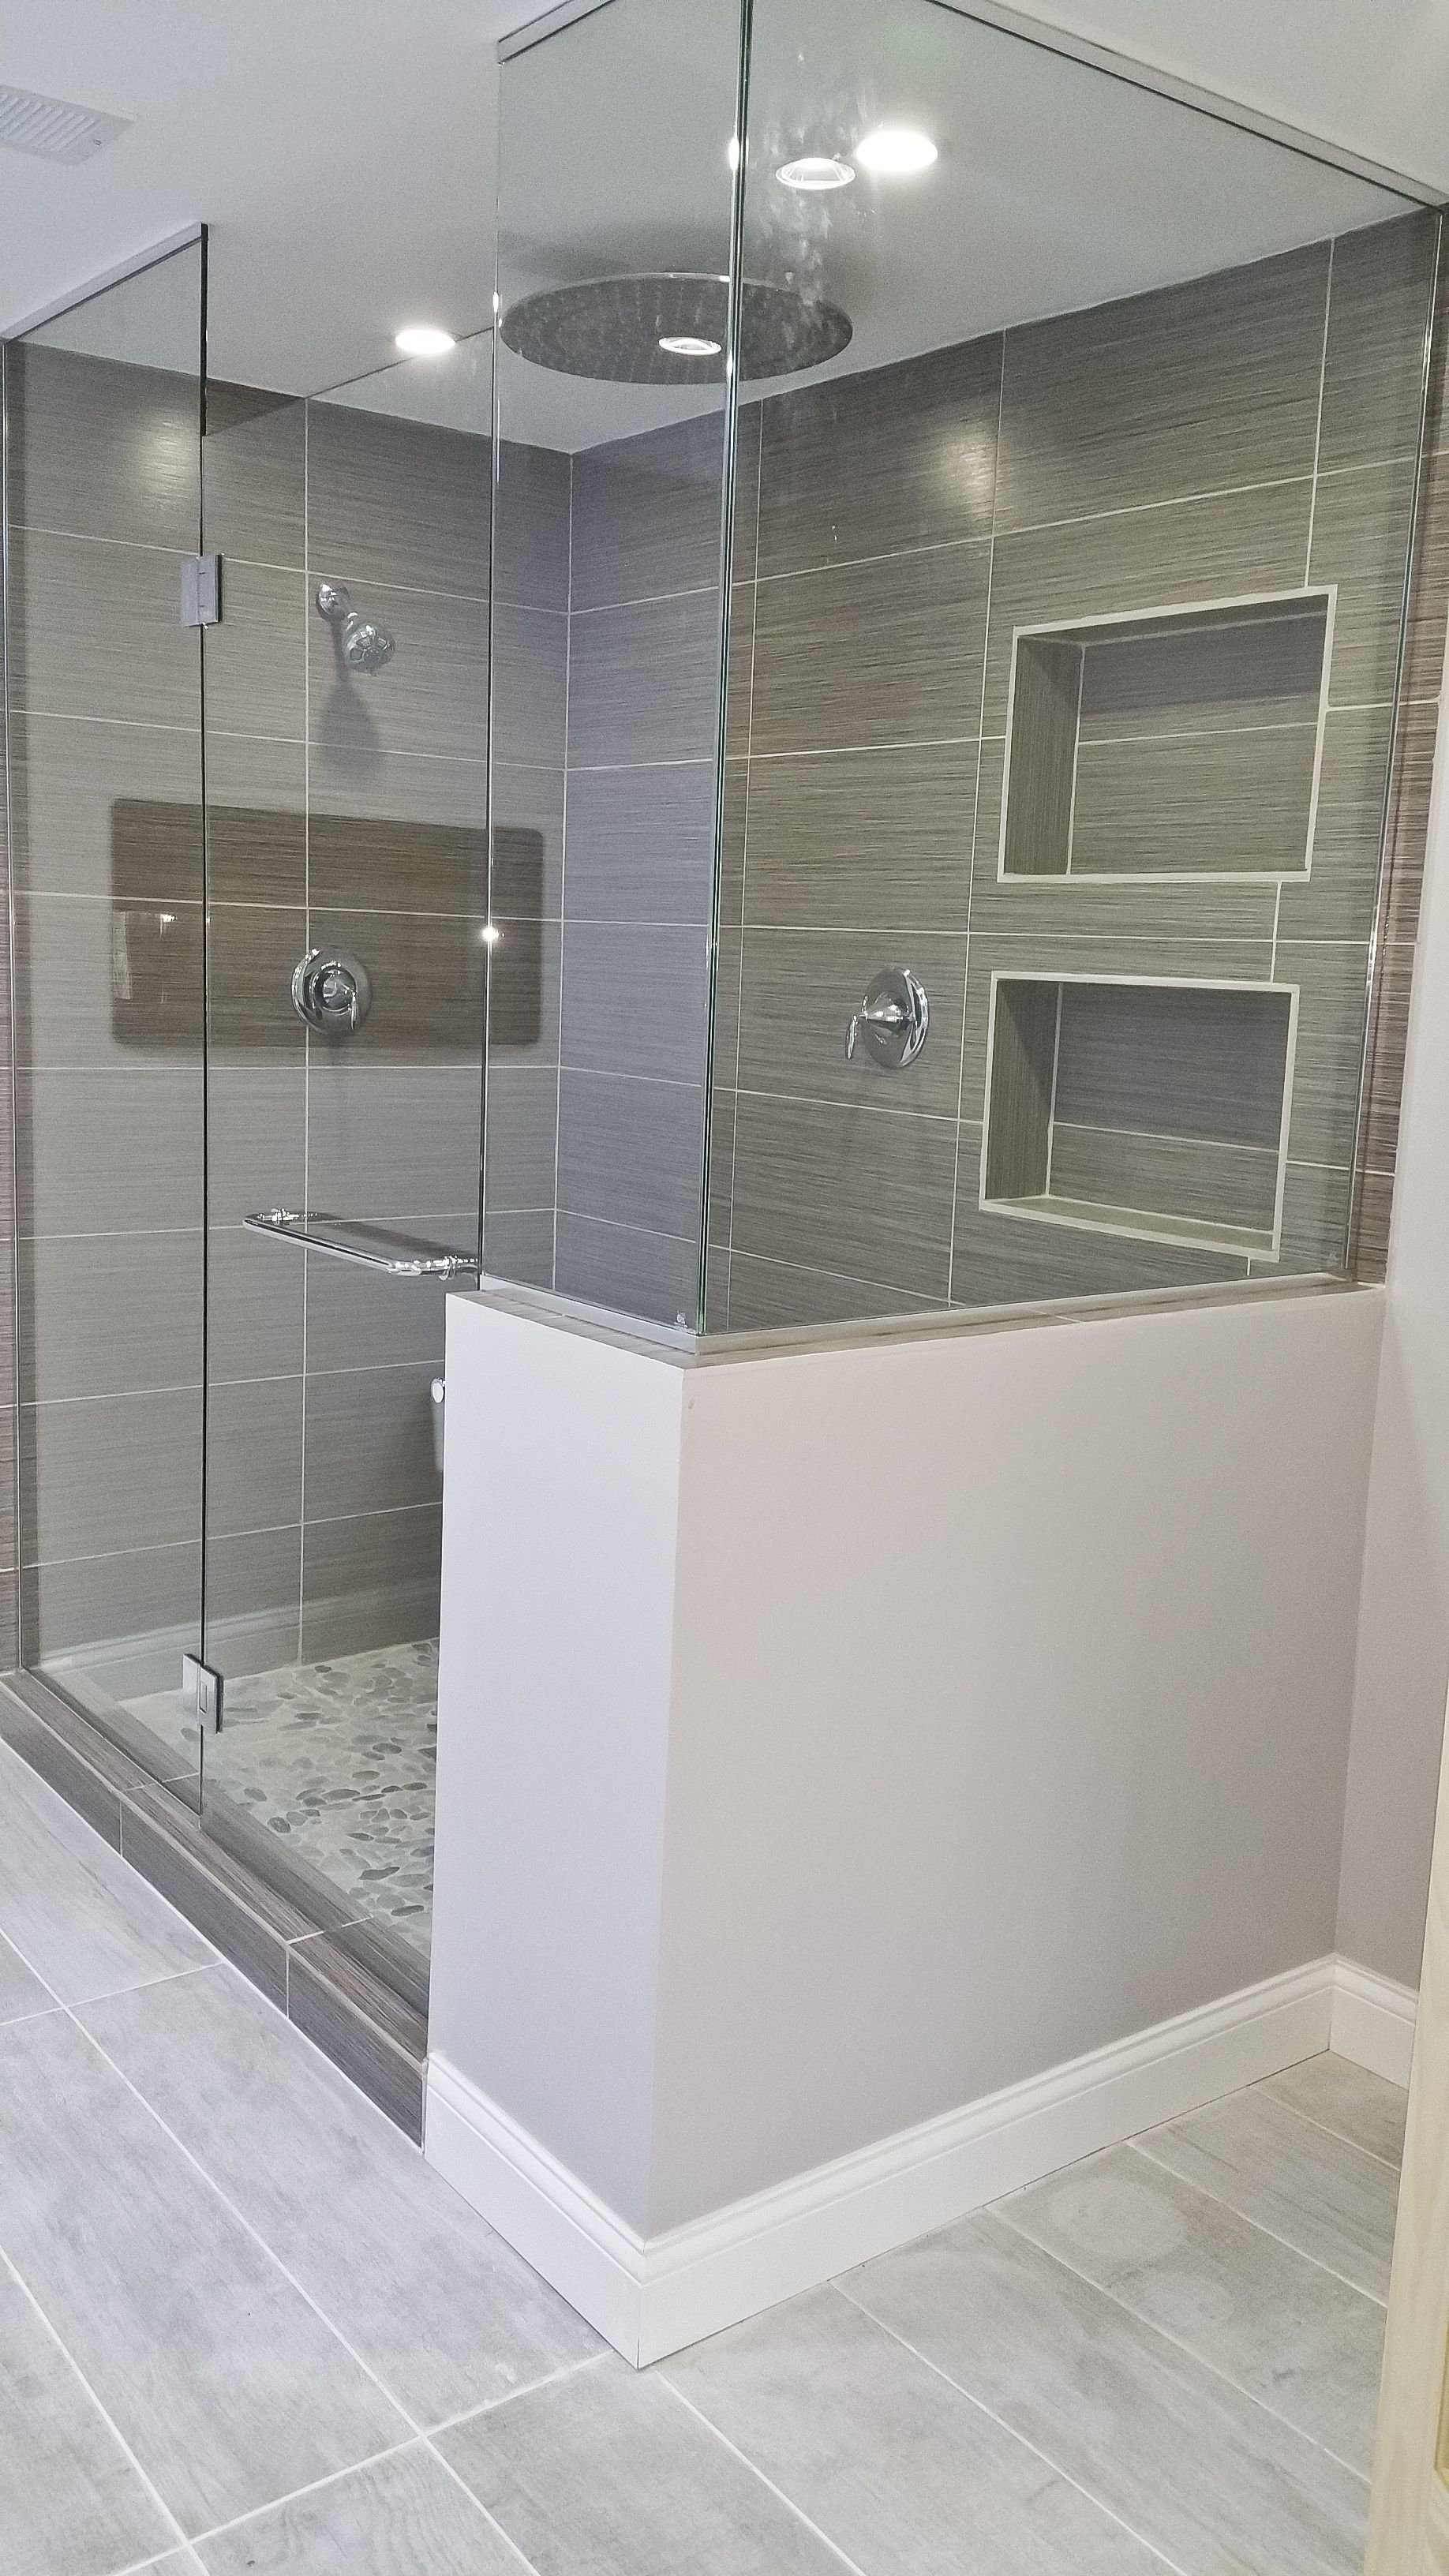 10 Wonderful Walk In Shower Tile Ideas we upgraded this 1980s style bathroom to a modern design wed love 2022